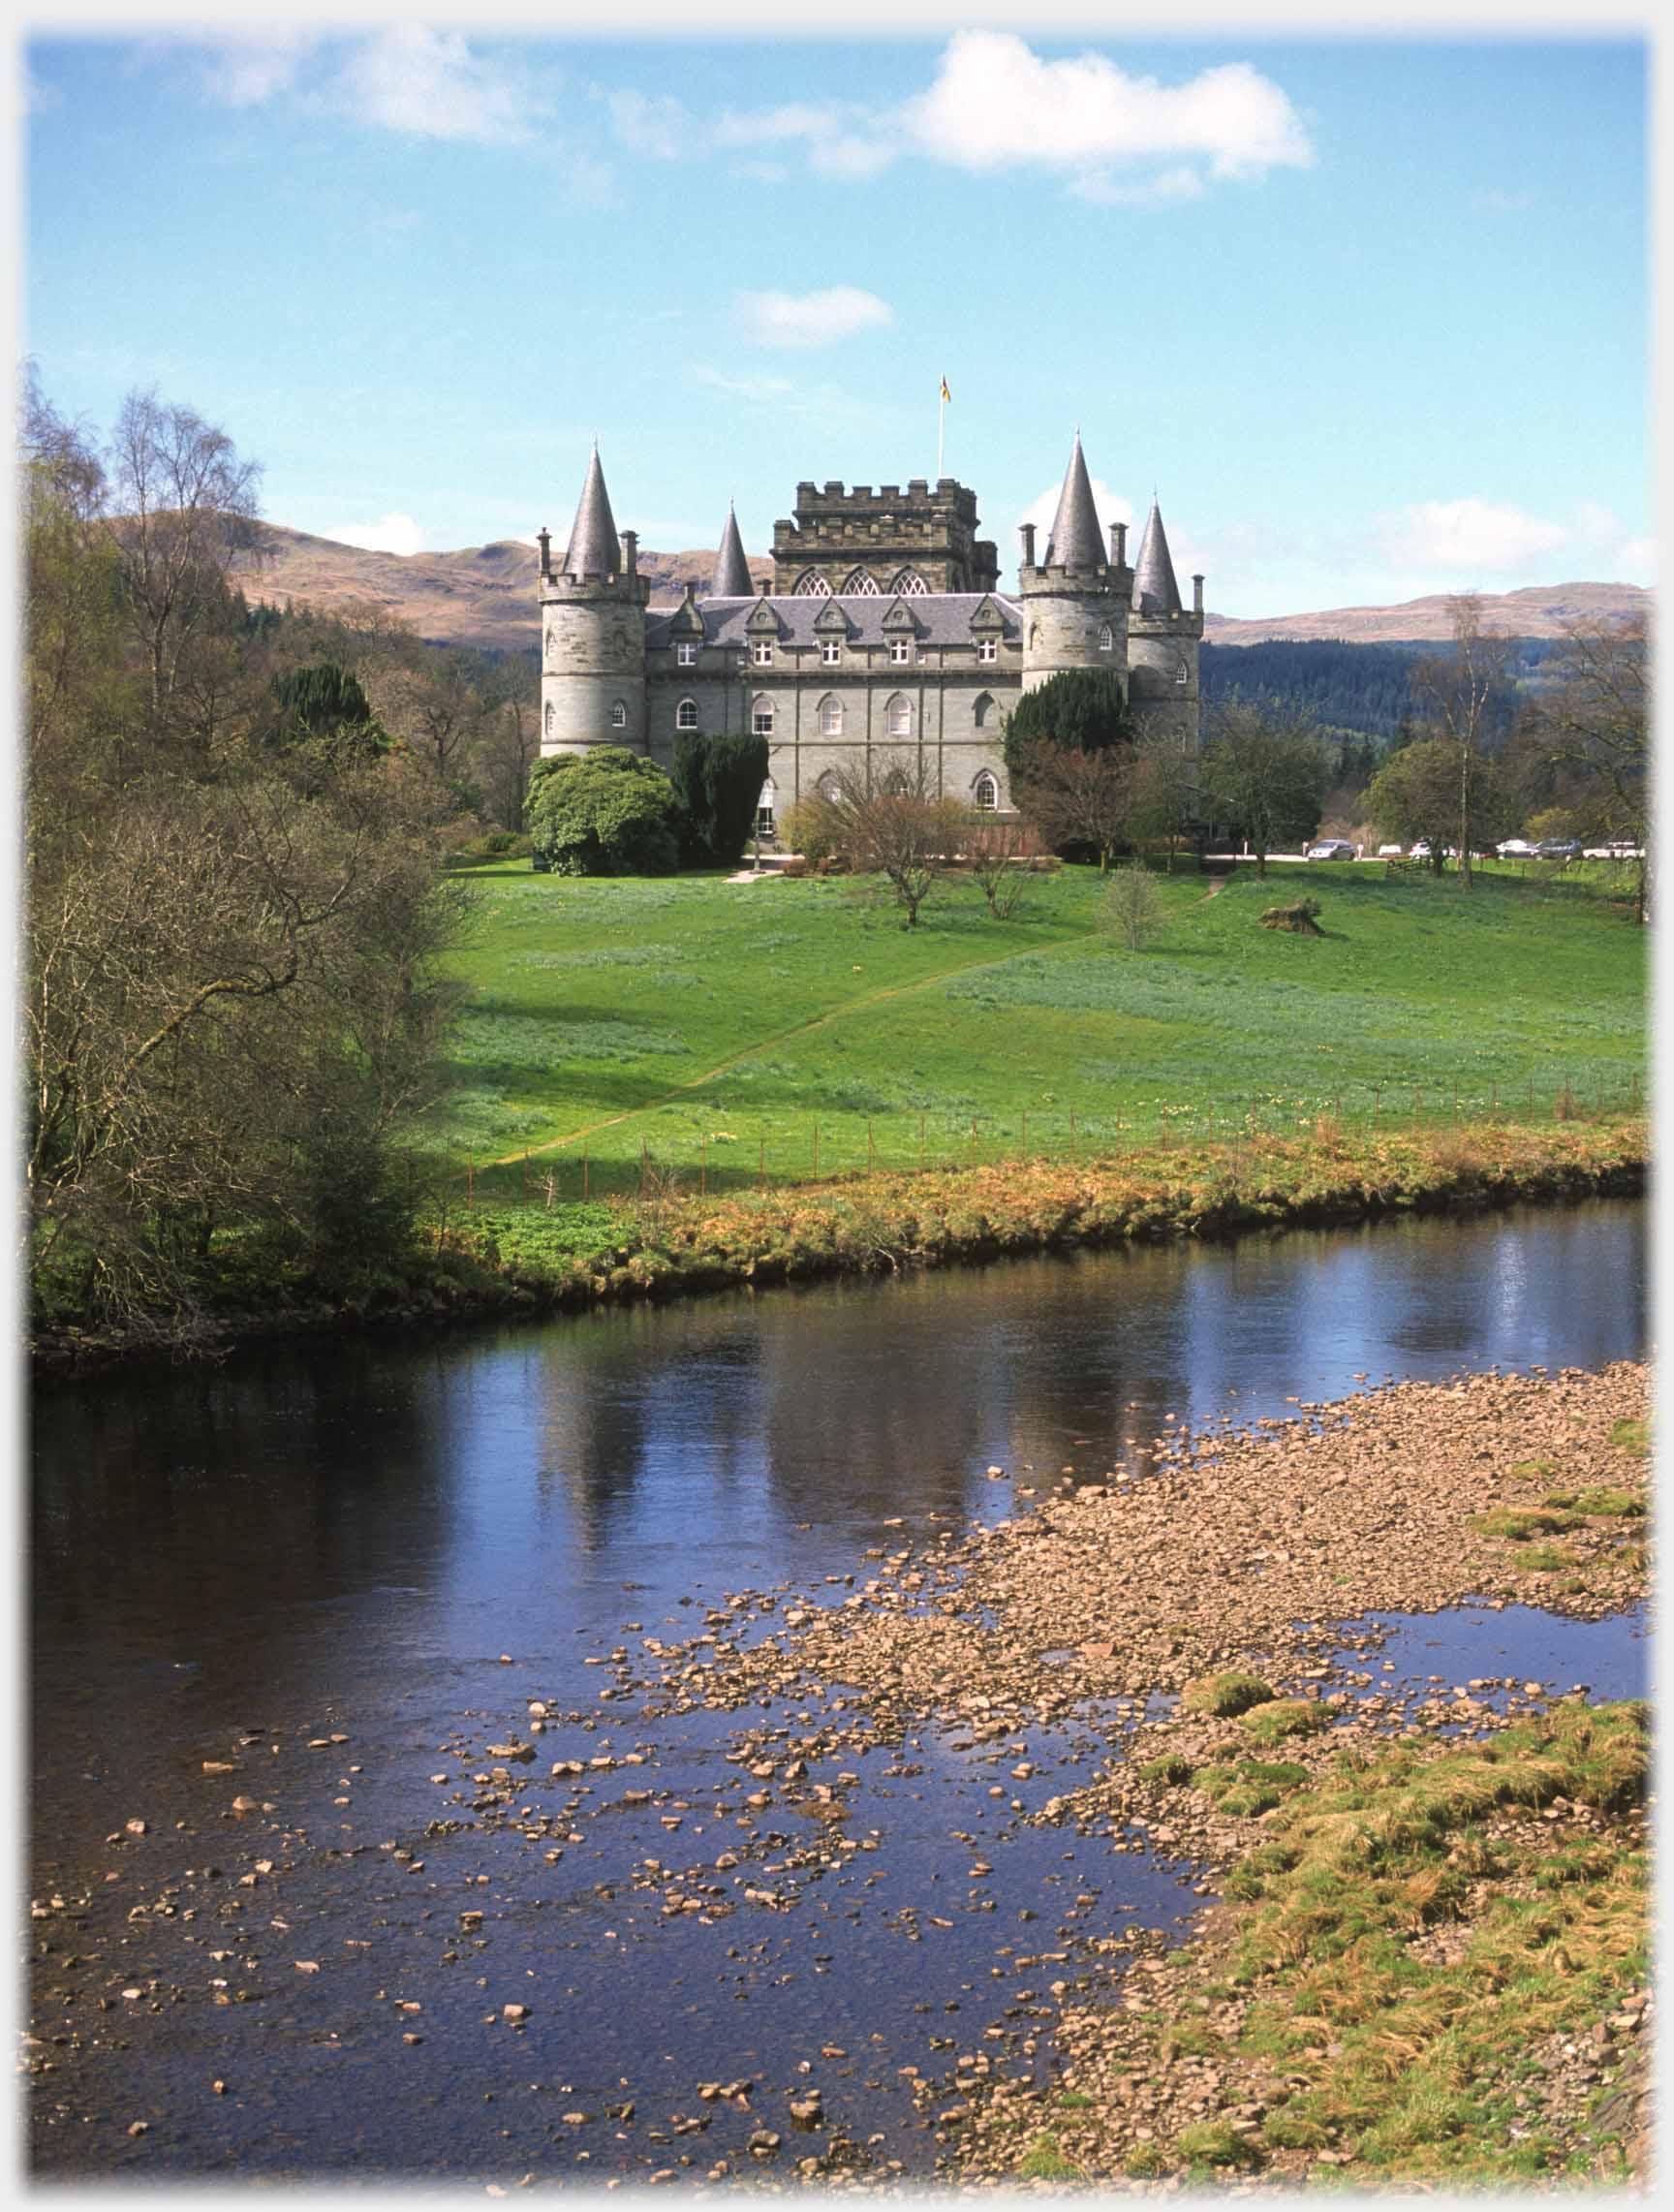 Gothic towered castle beyond river.